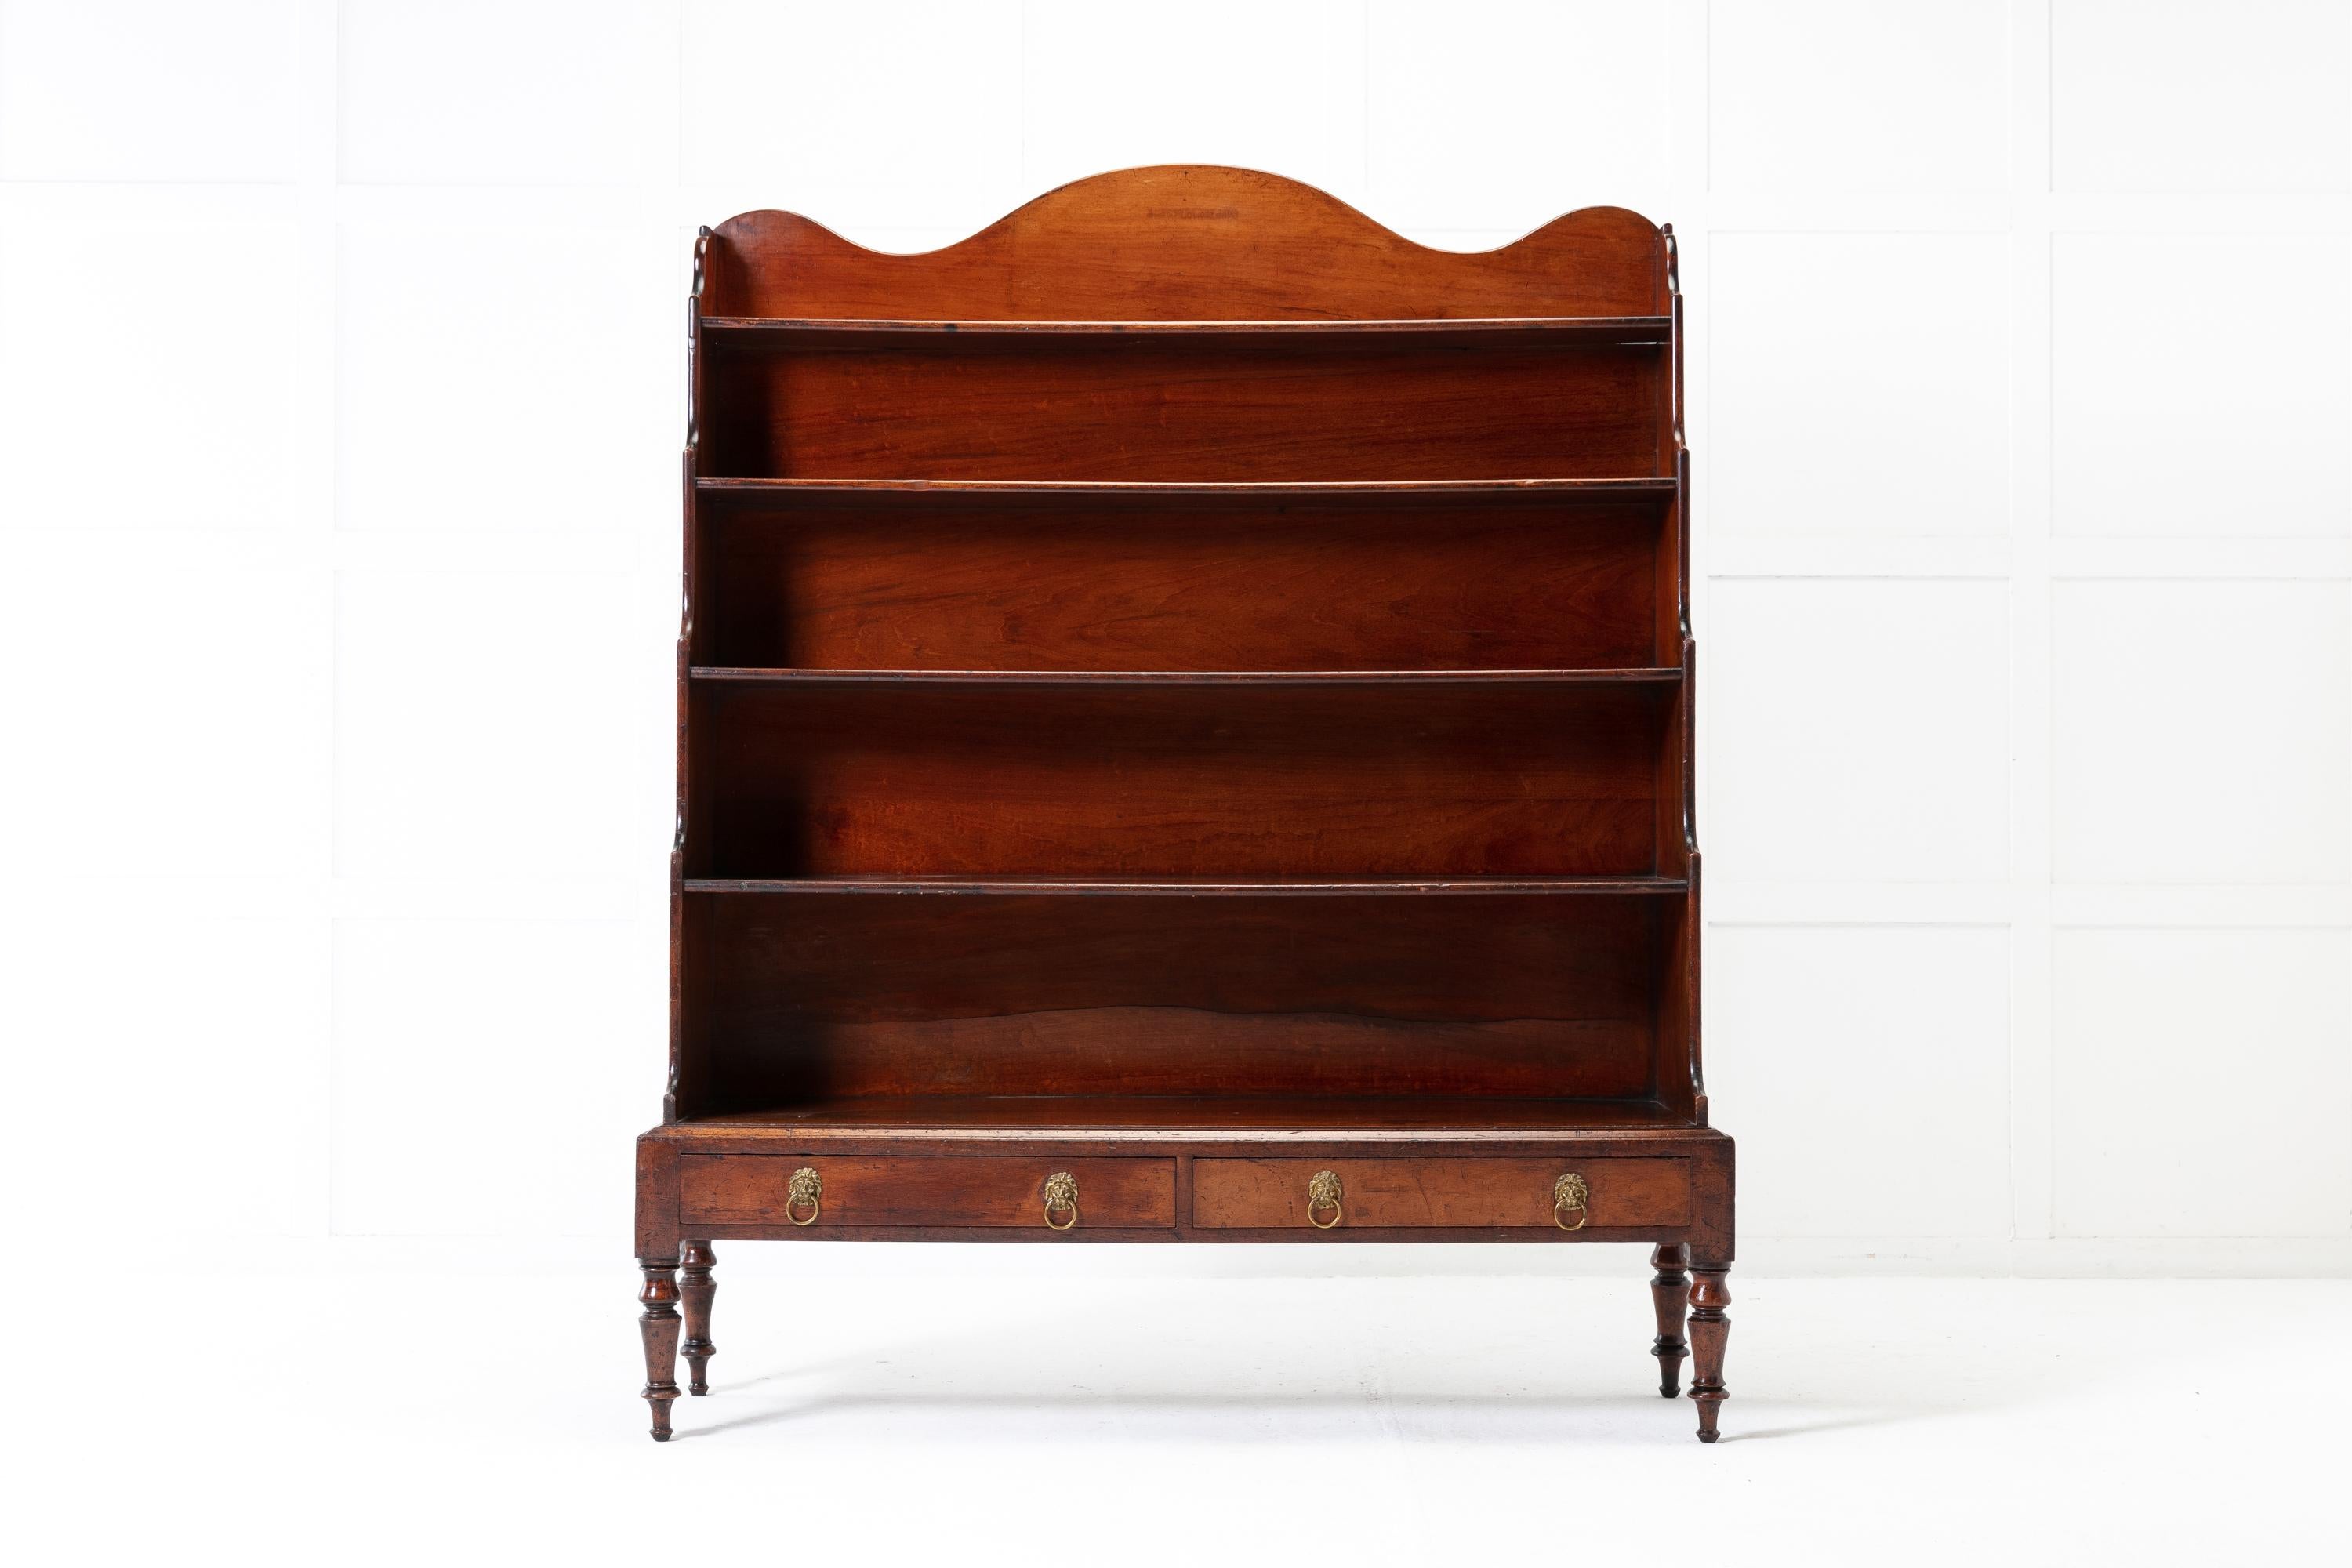 An unusual and large scaled 19th century mahogany waterfall/open bookcase of upright rectangular form with five fixed, graduated shelves. Having a shaped top over a panelled back. The waterfall sides having shaped tops. There are two lower drawers